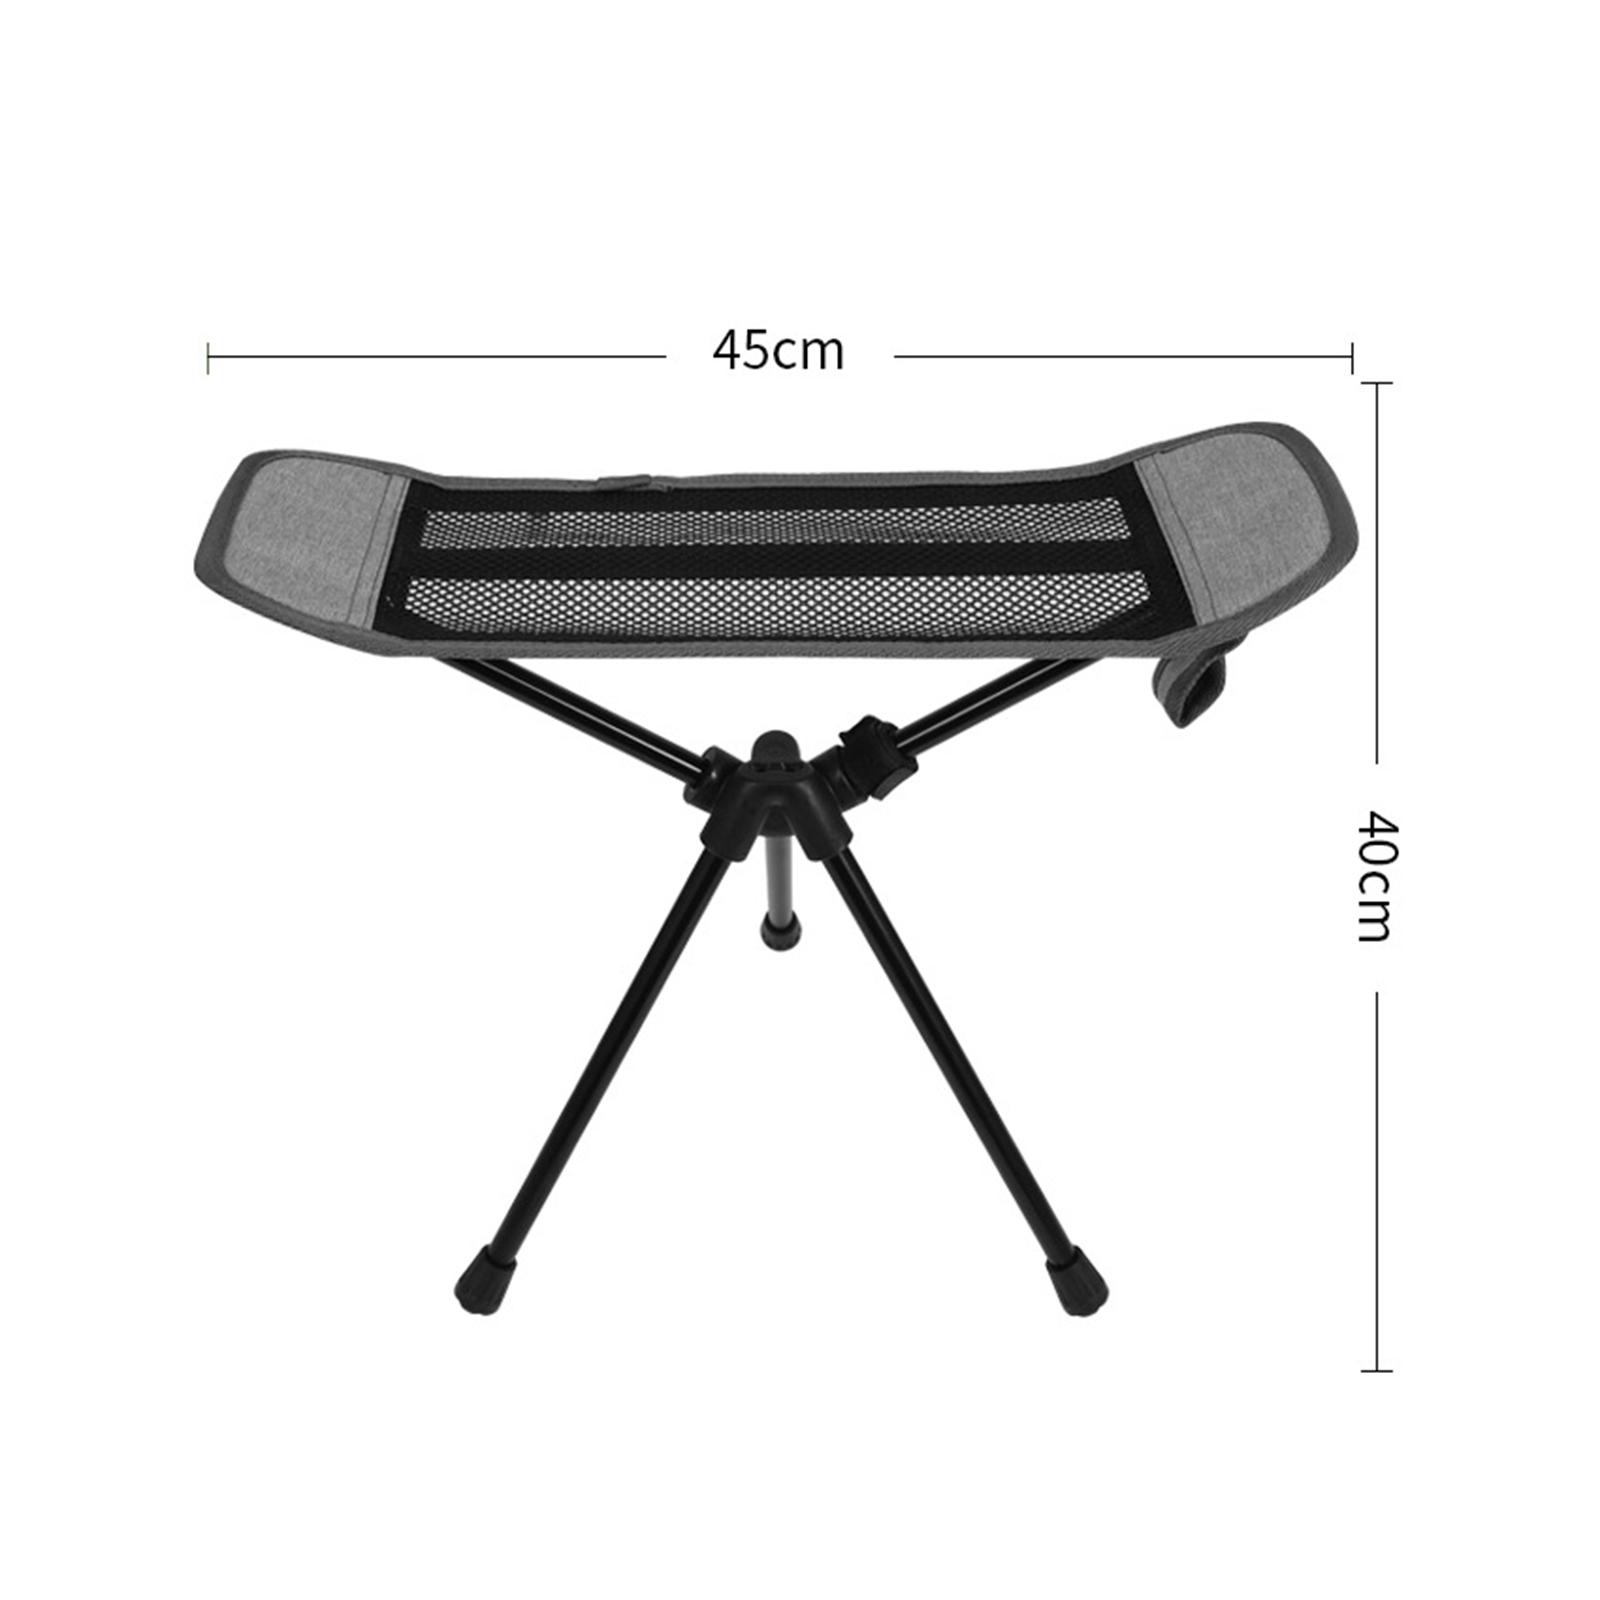 Portable Folding Chair Ottoman Outdoor Recliner Lazy Footrest Leg Rest Camping Chair Footstool for Hiking Fishing Picnic - image 5 of 10